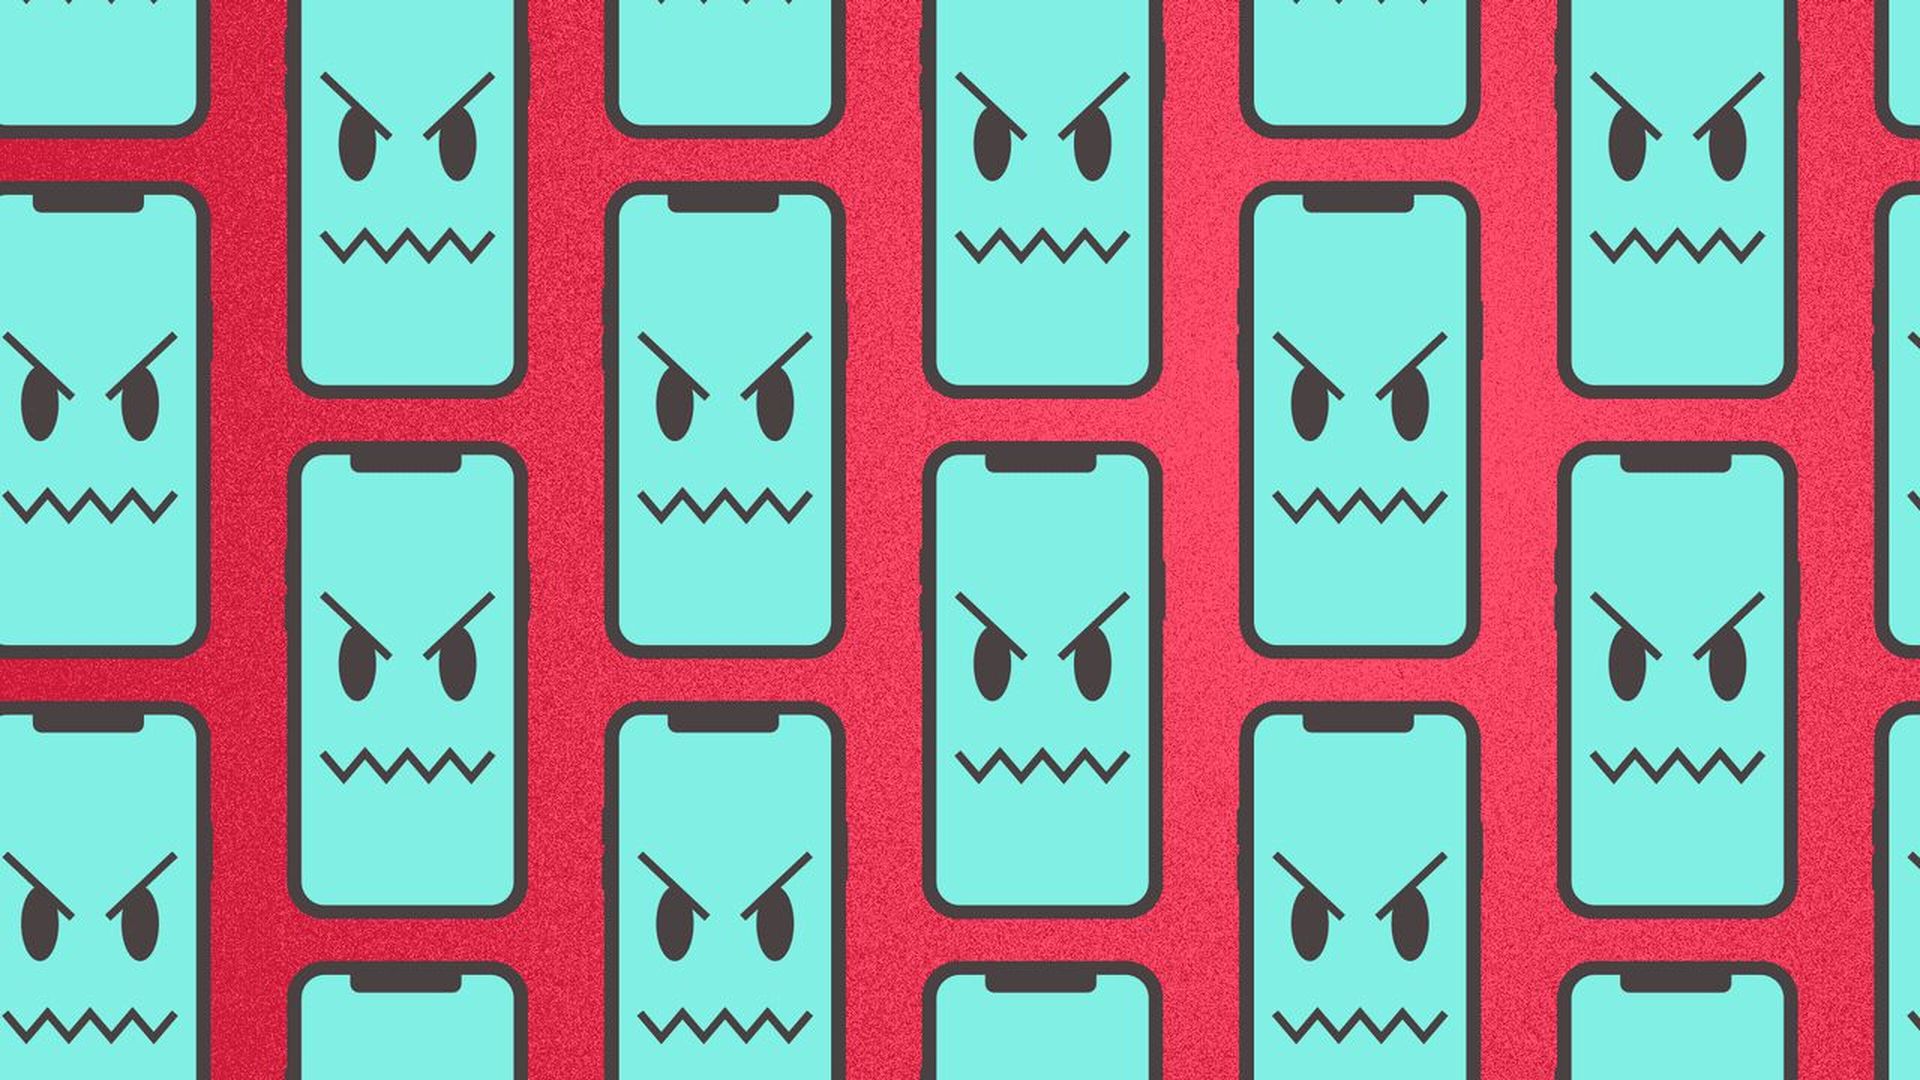 Illustration of a smartphone with an angry face multiplying into many smartphones. 